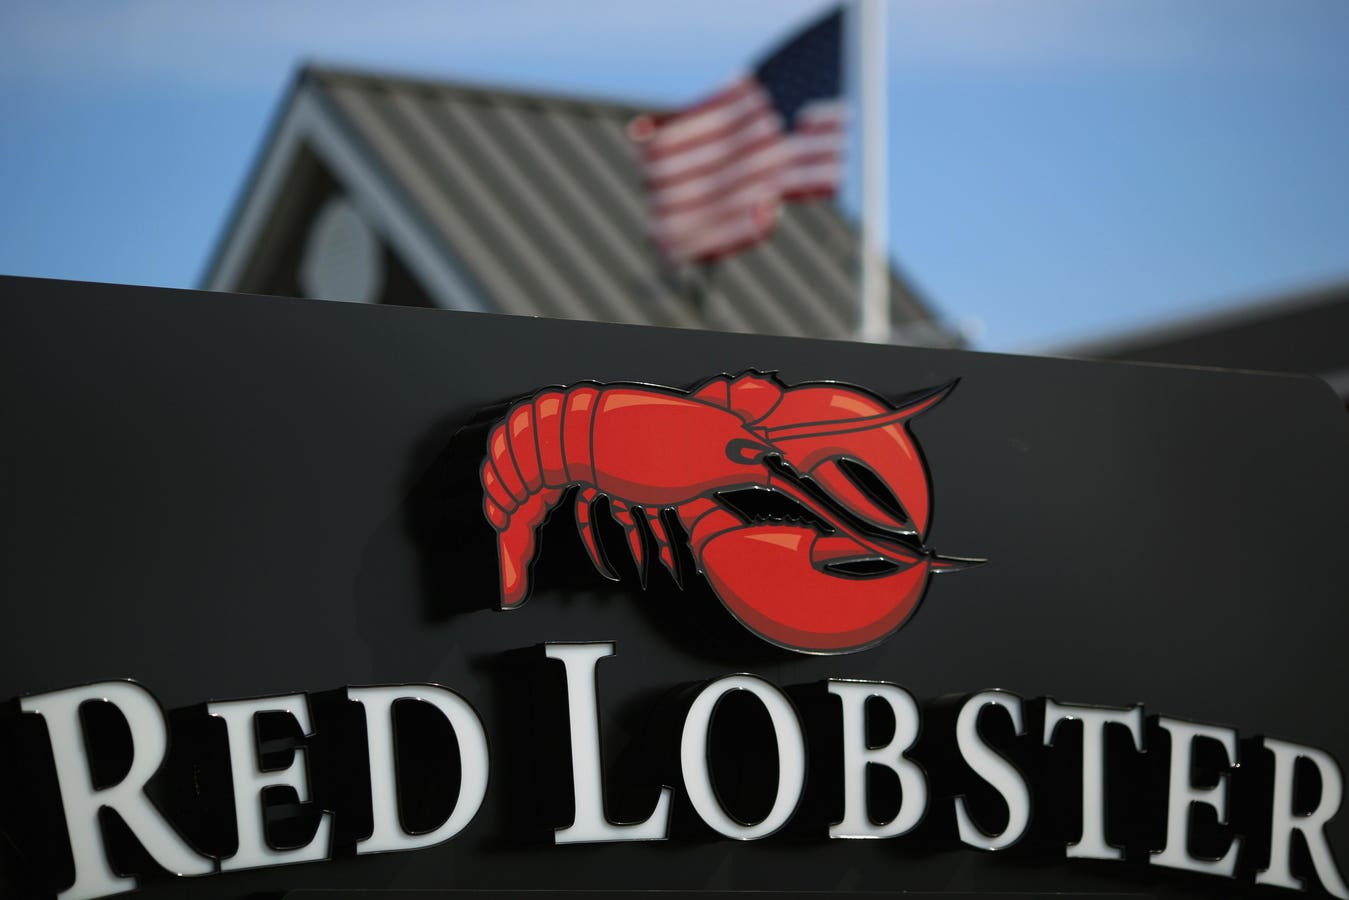 Red Lobster Mass Closings: Here's Where The Chain Is Abruptly Shutting Down Stores—And Why